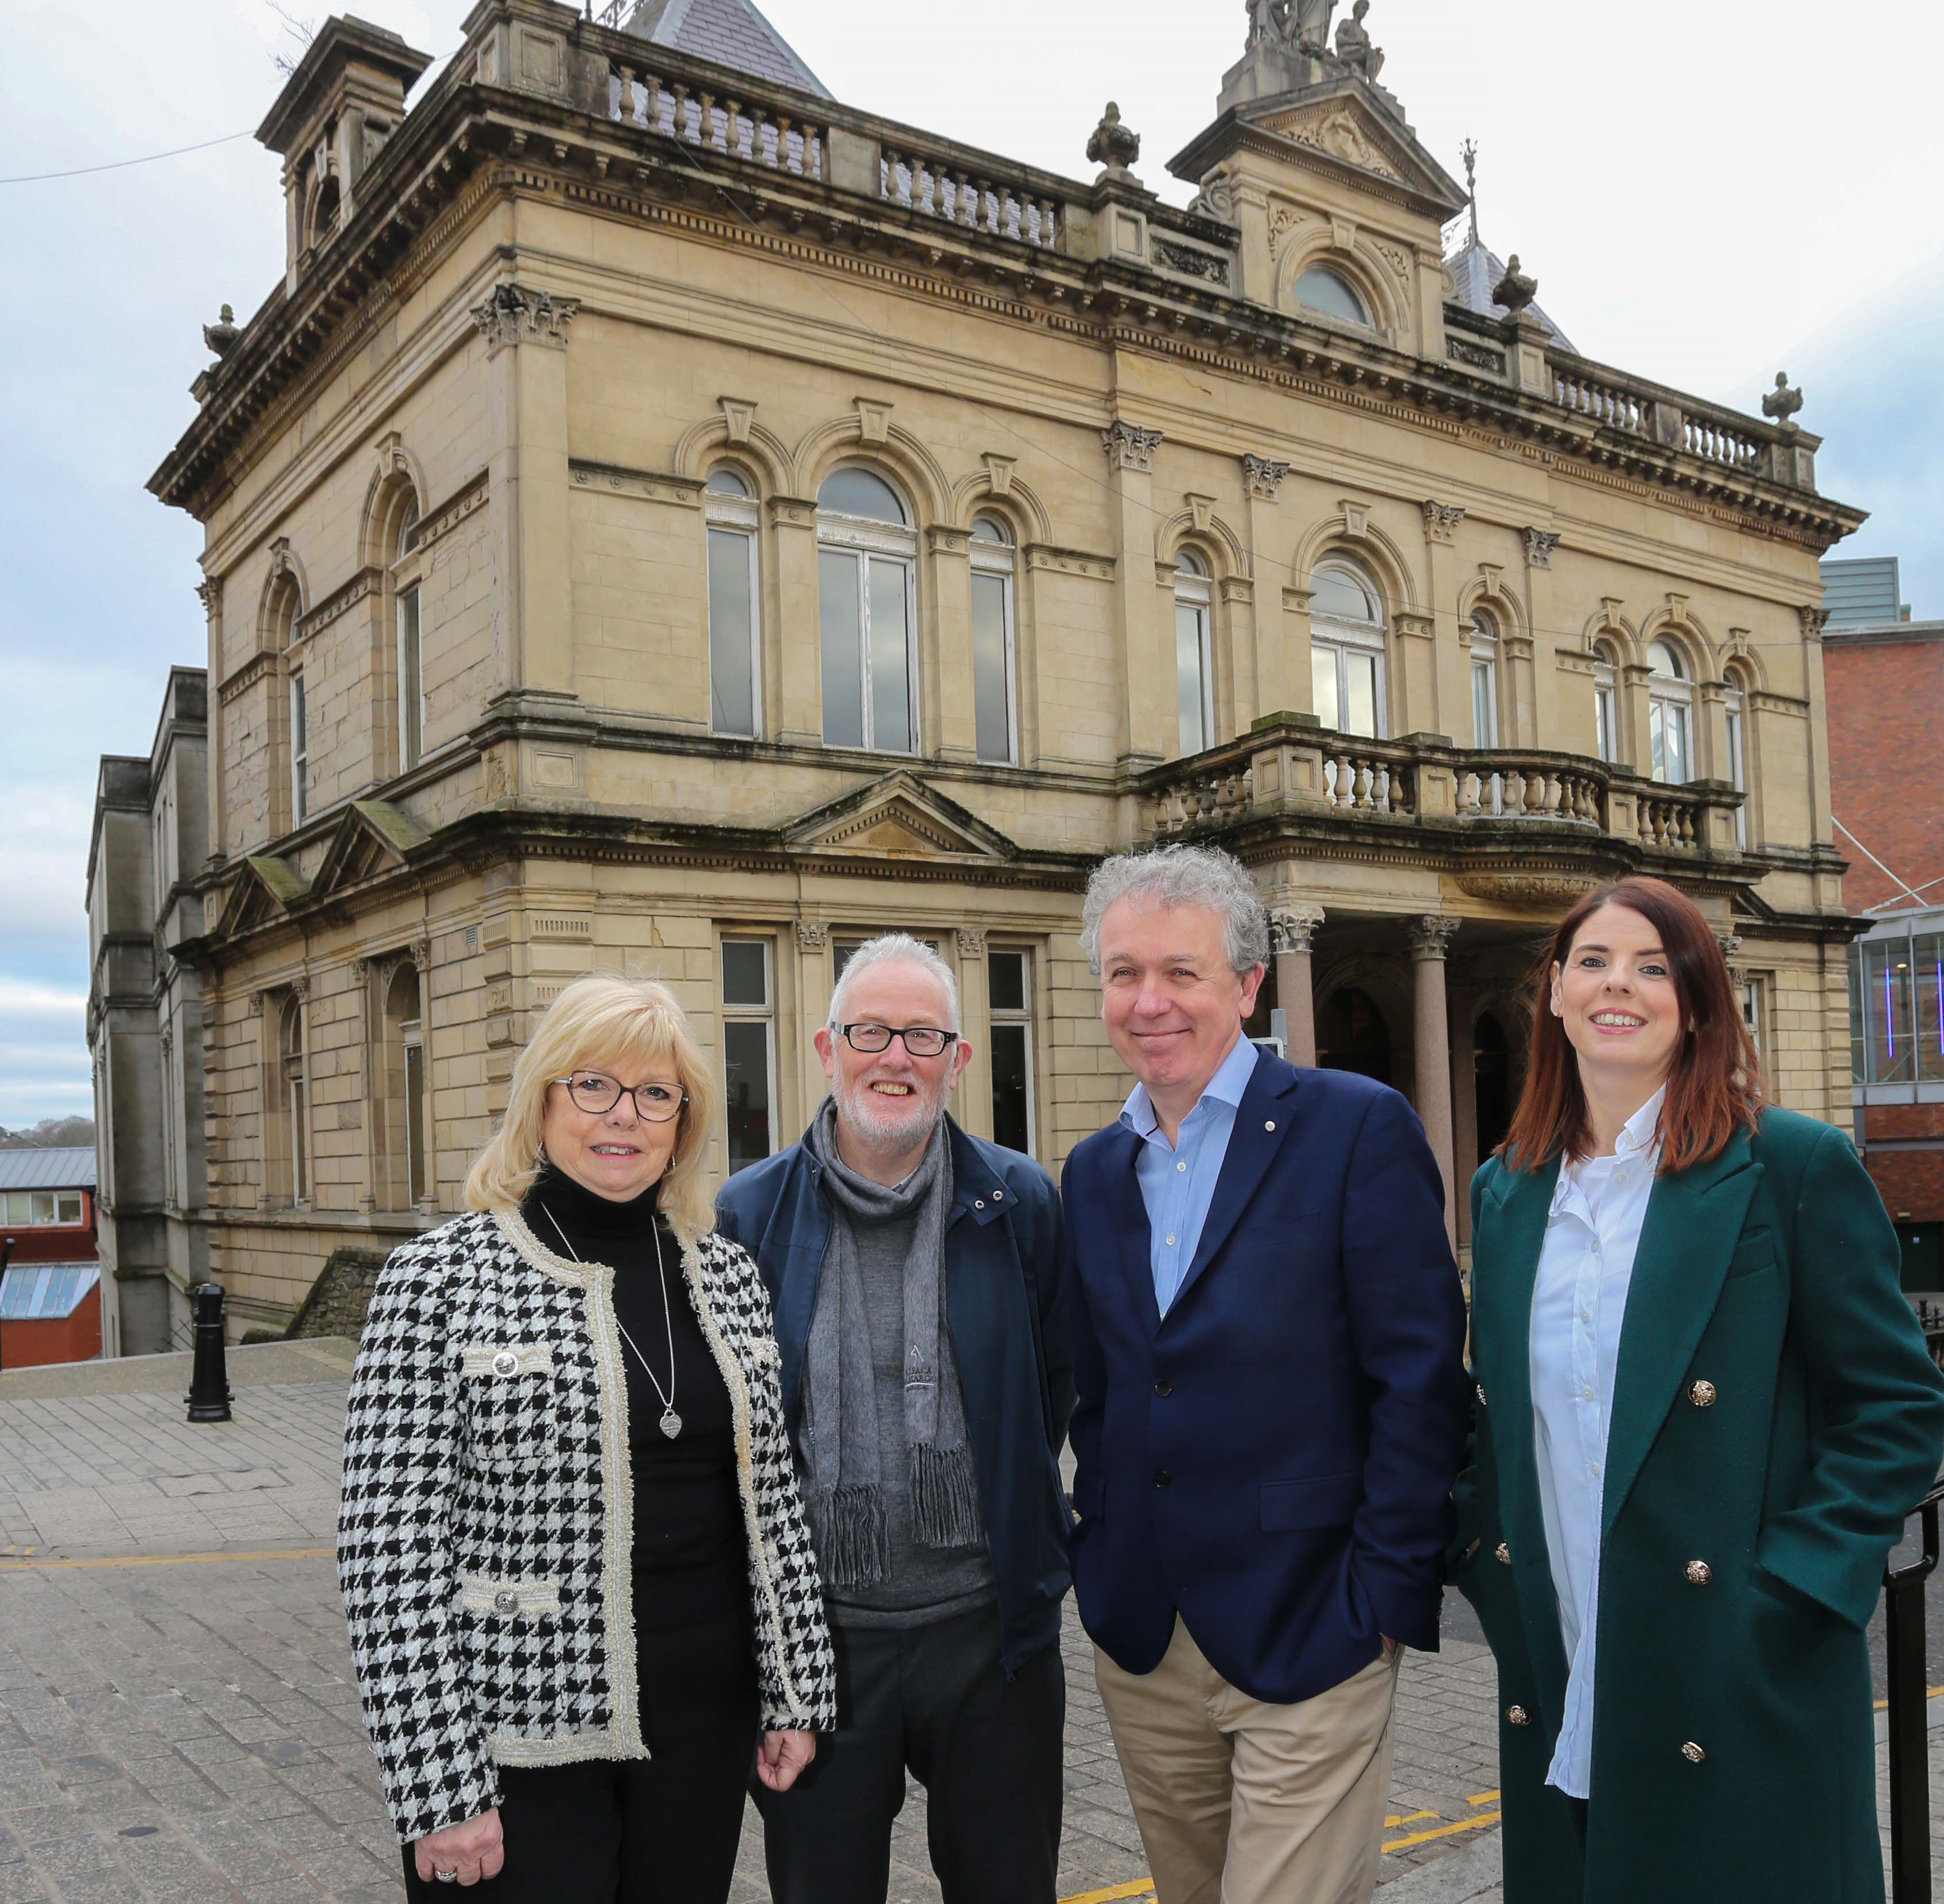 Outside Image of St Columb's Hall Featuring Staff, Trustees and the Funder, Paul Mullan of National Lottery Heritage Fund